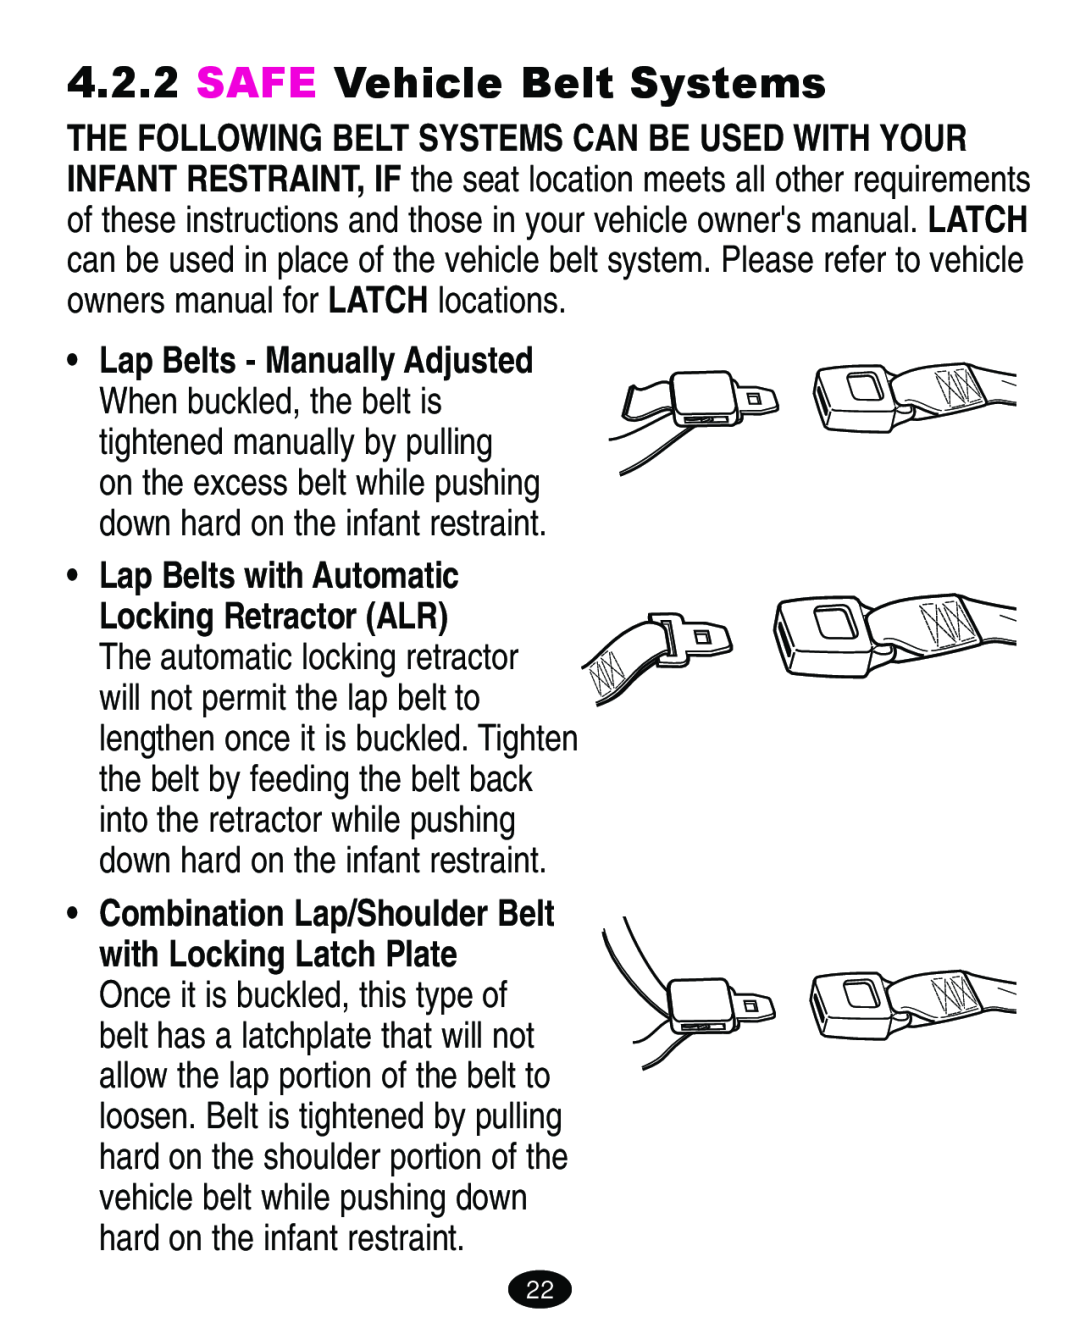 Graco 4460402 manual SAFE Vehicle Belt Systems, Lap Belts with Automatic Locking Retractor ALR 